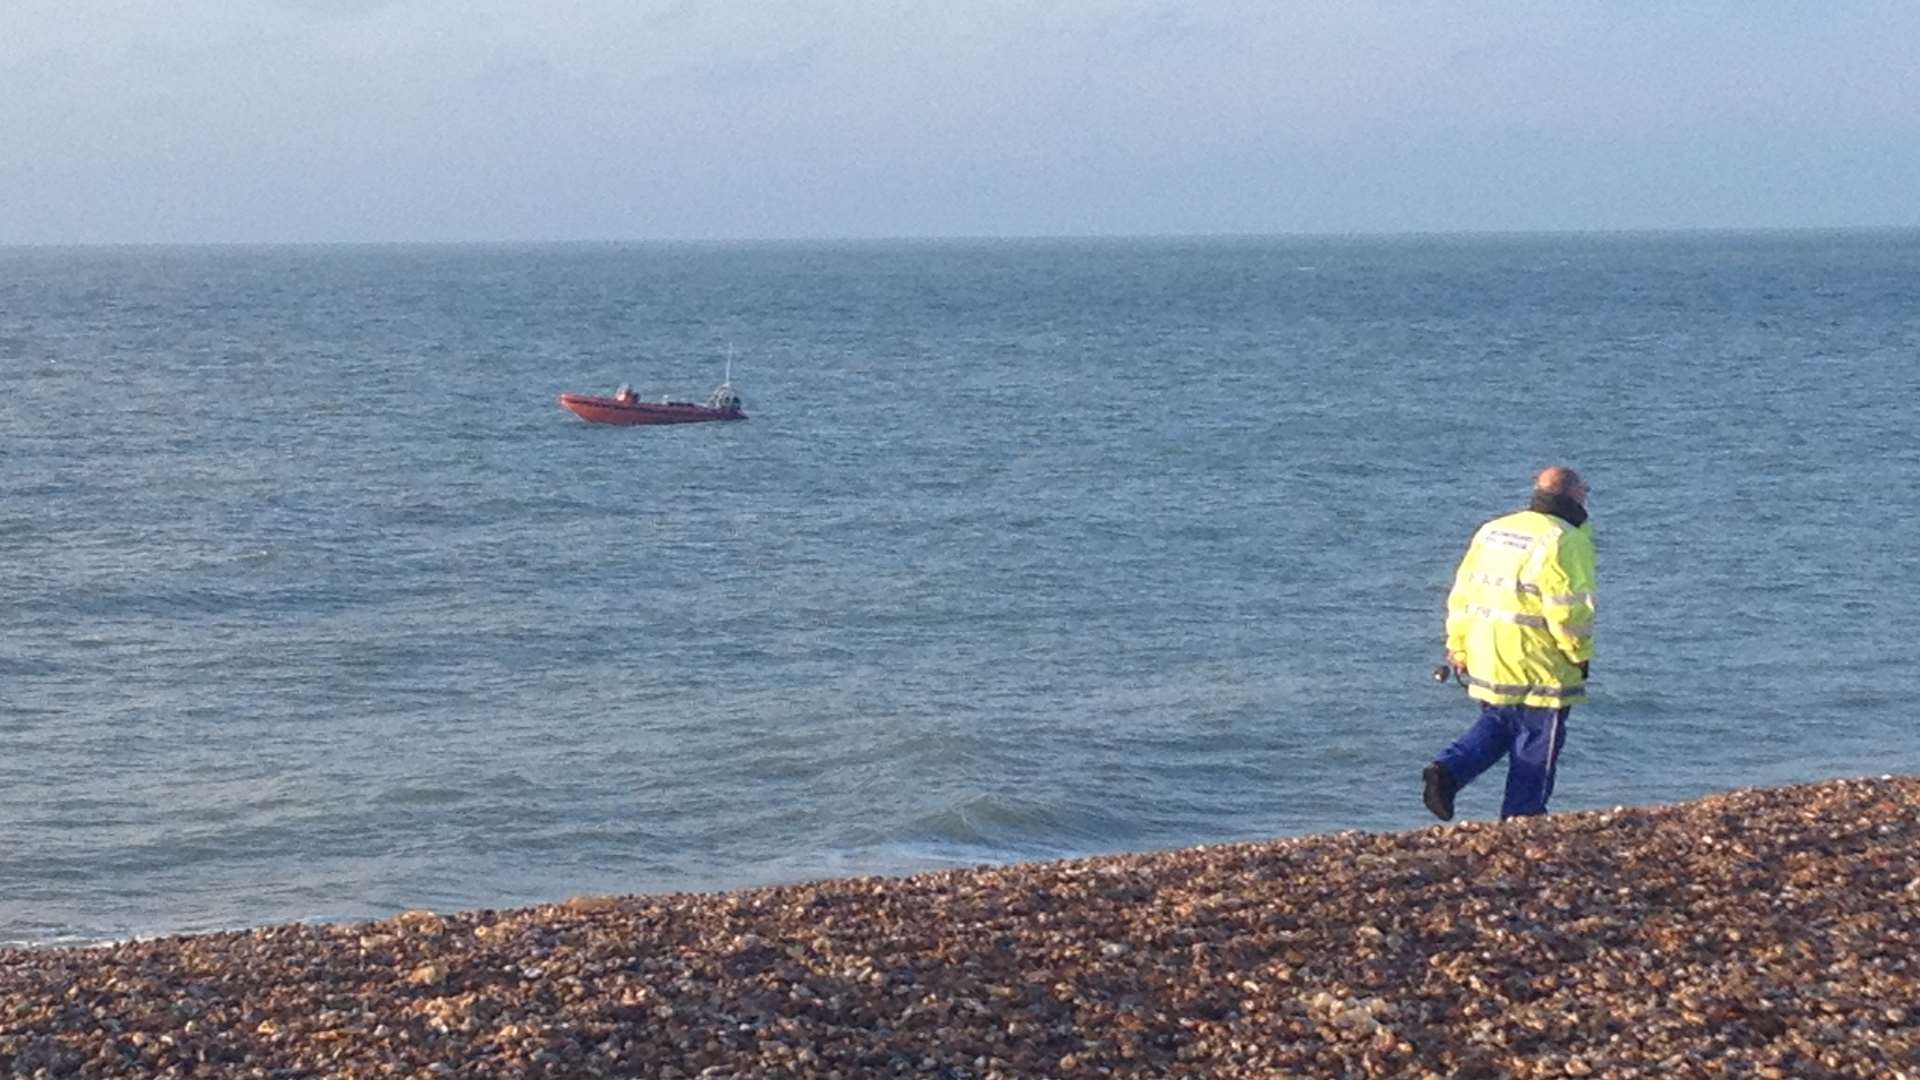 Folkestone Coastguard after an abandoned boat was spotted in the sea off the coast of Sandgate